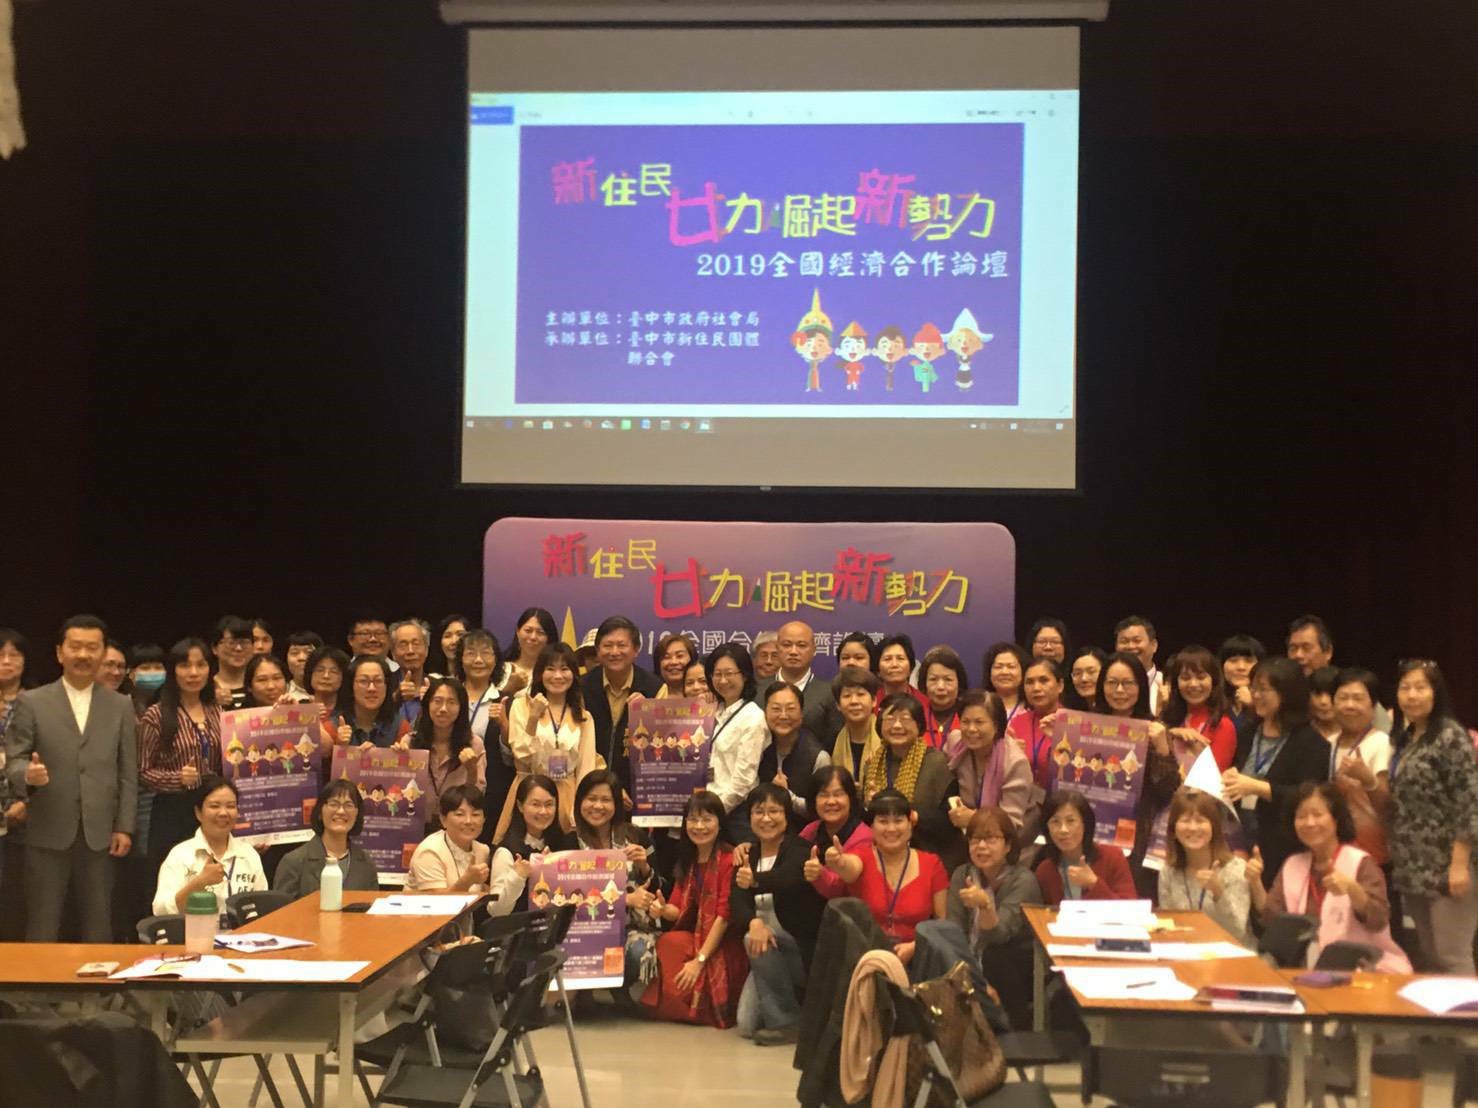 Female new resident economics conference in Taichung/ Taichung City Hall photo